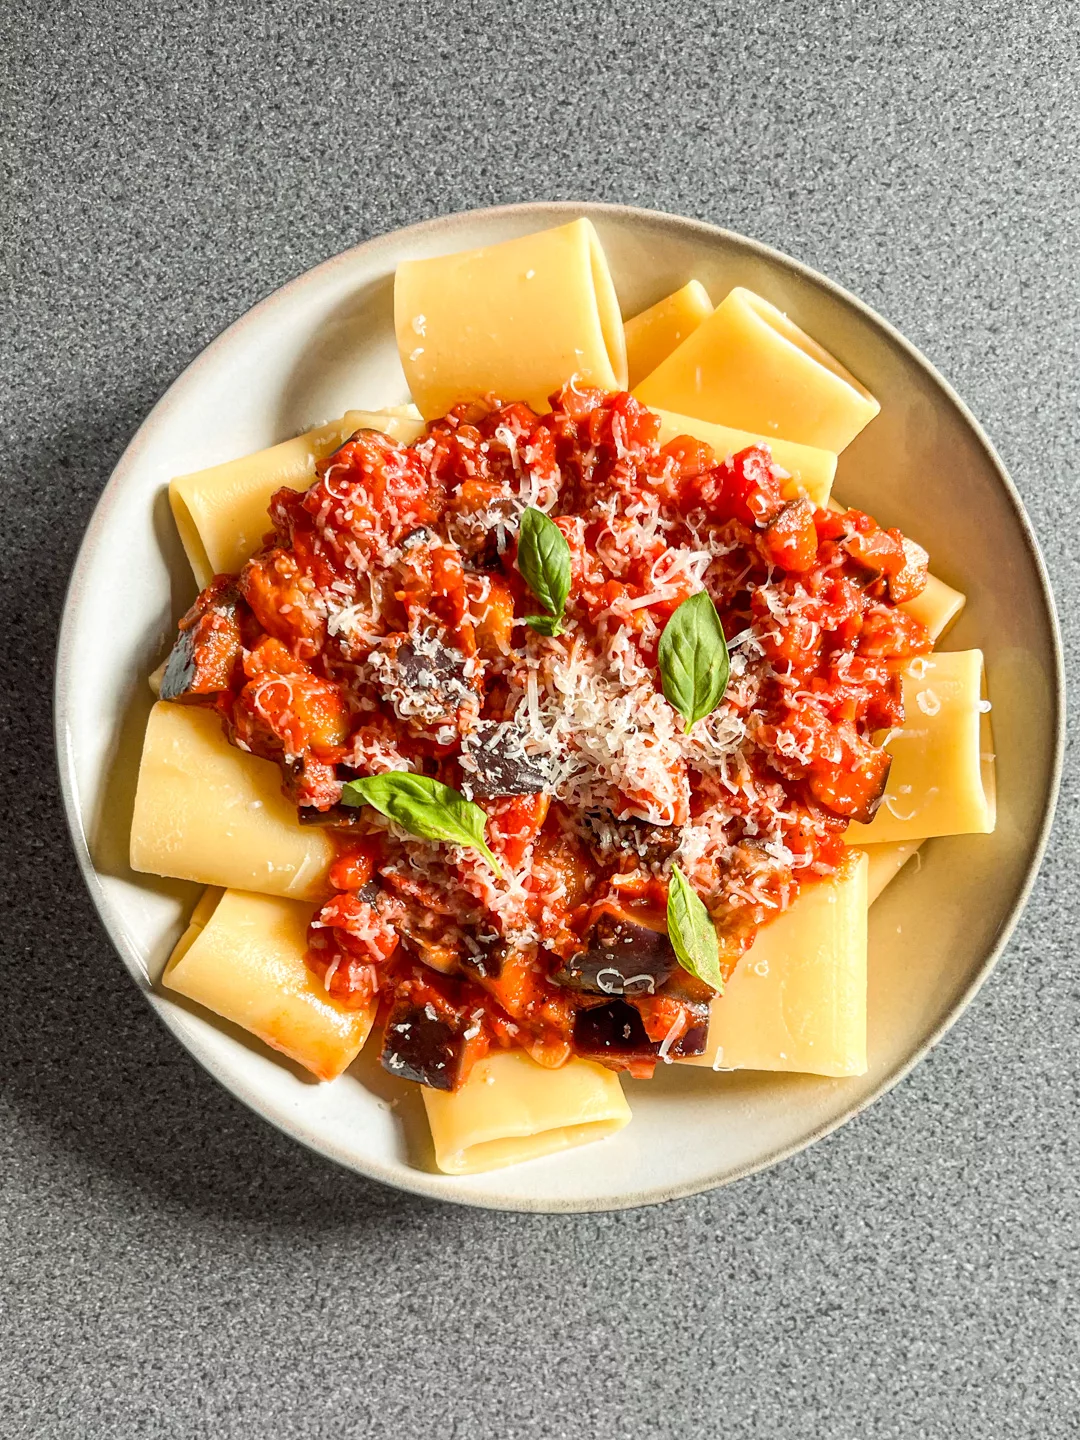 top view of a bowl of paccheri pasta with eggplant and tomato sauce